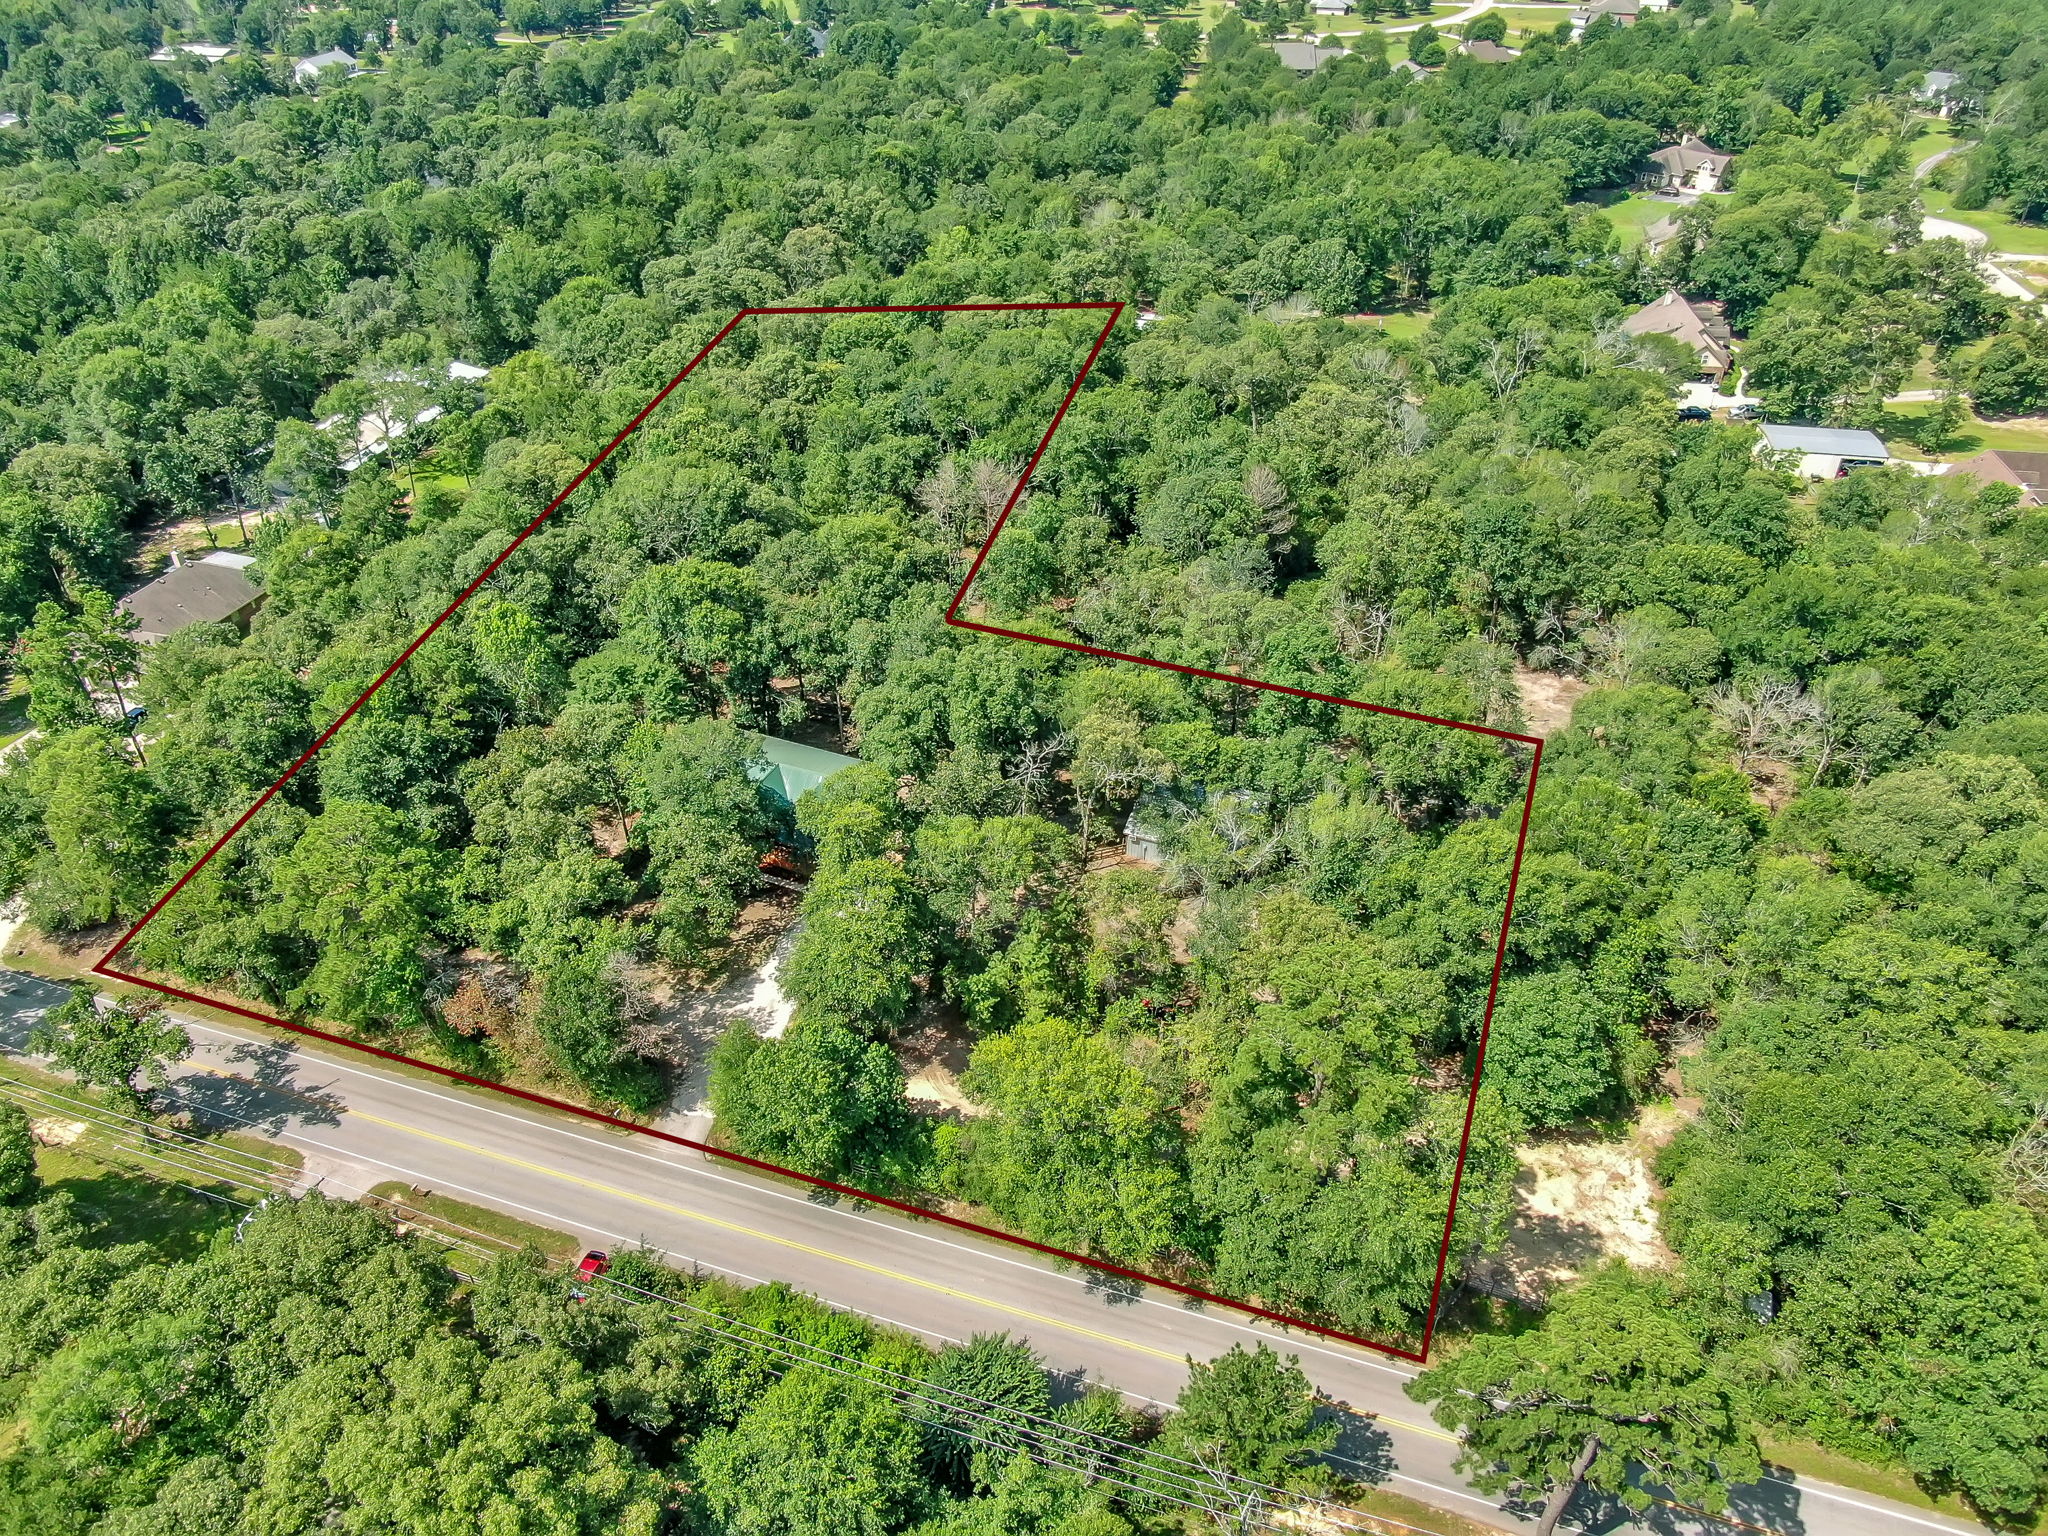 NOTE: The 5.807 total acres associated with this property is actually a combination of two (2) separate parcels: Tax ID# 4008-04-01500 (Lot 15) AND Tax ID# 4008-04-01400 (Lot 14).